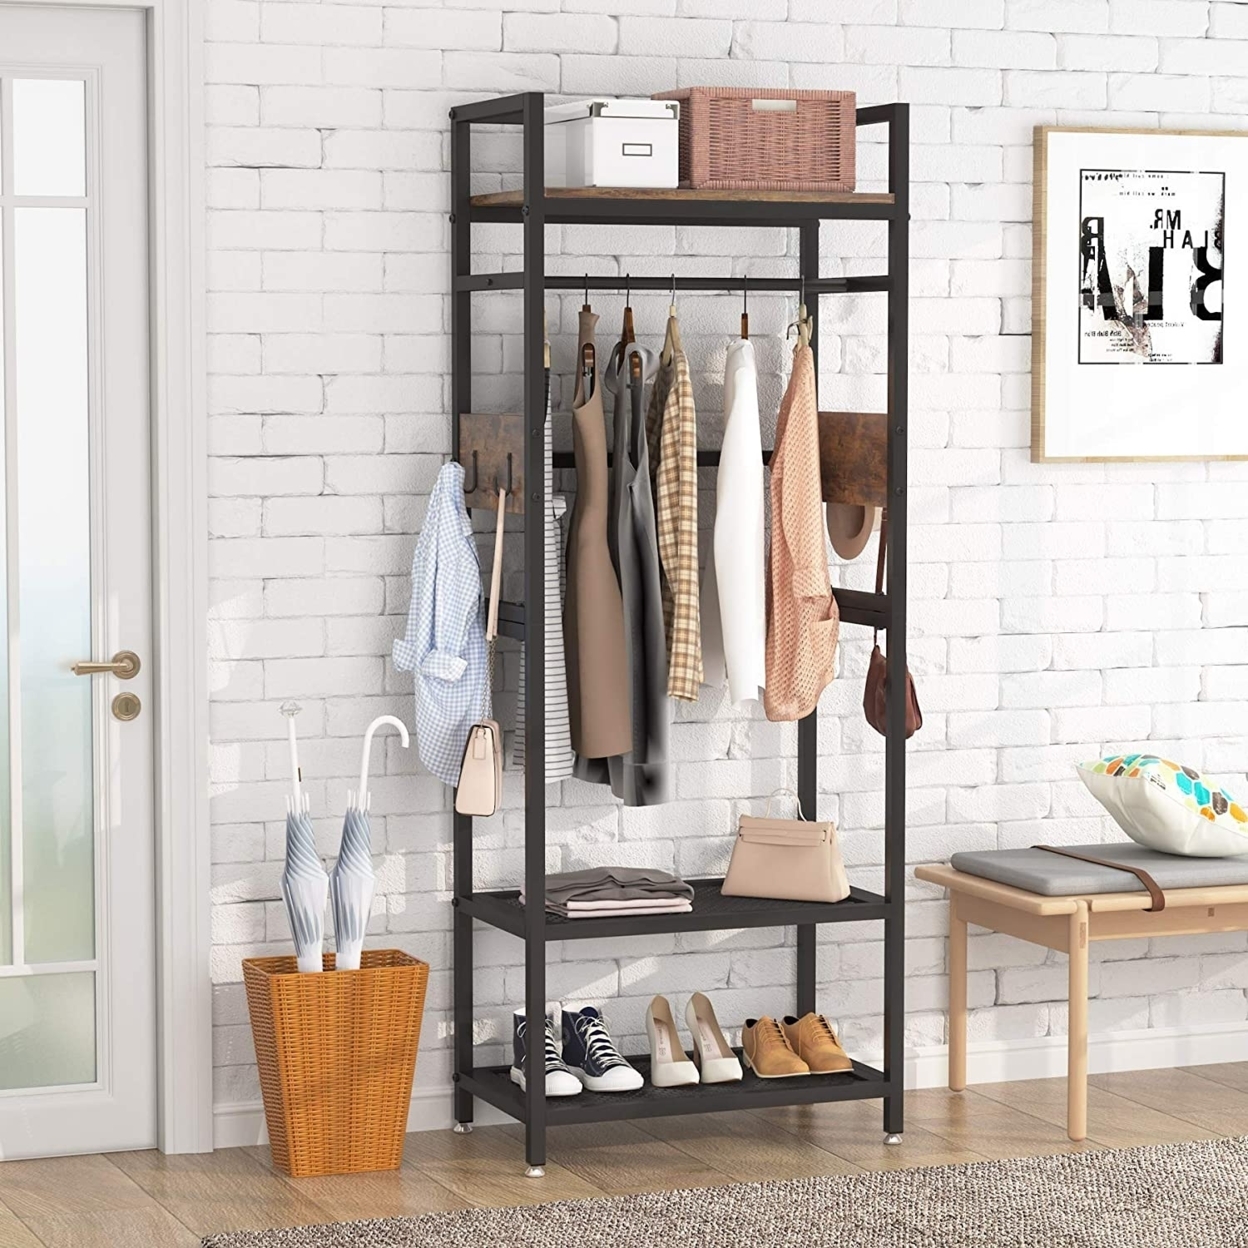 Tribesigns Industrial Hall Tree,Entryway Coat Rack With With Shoe Storage Shelf And Hooks,Freestanding Closet Organizer Clothes Rack,Closet